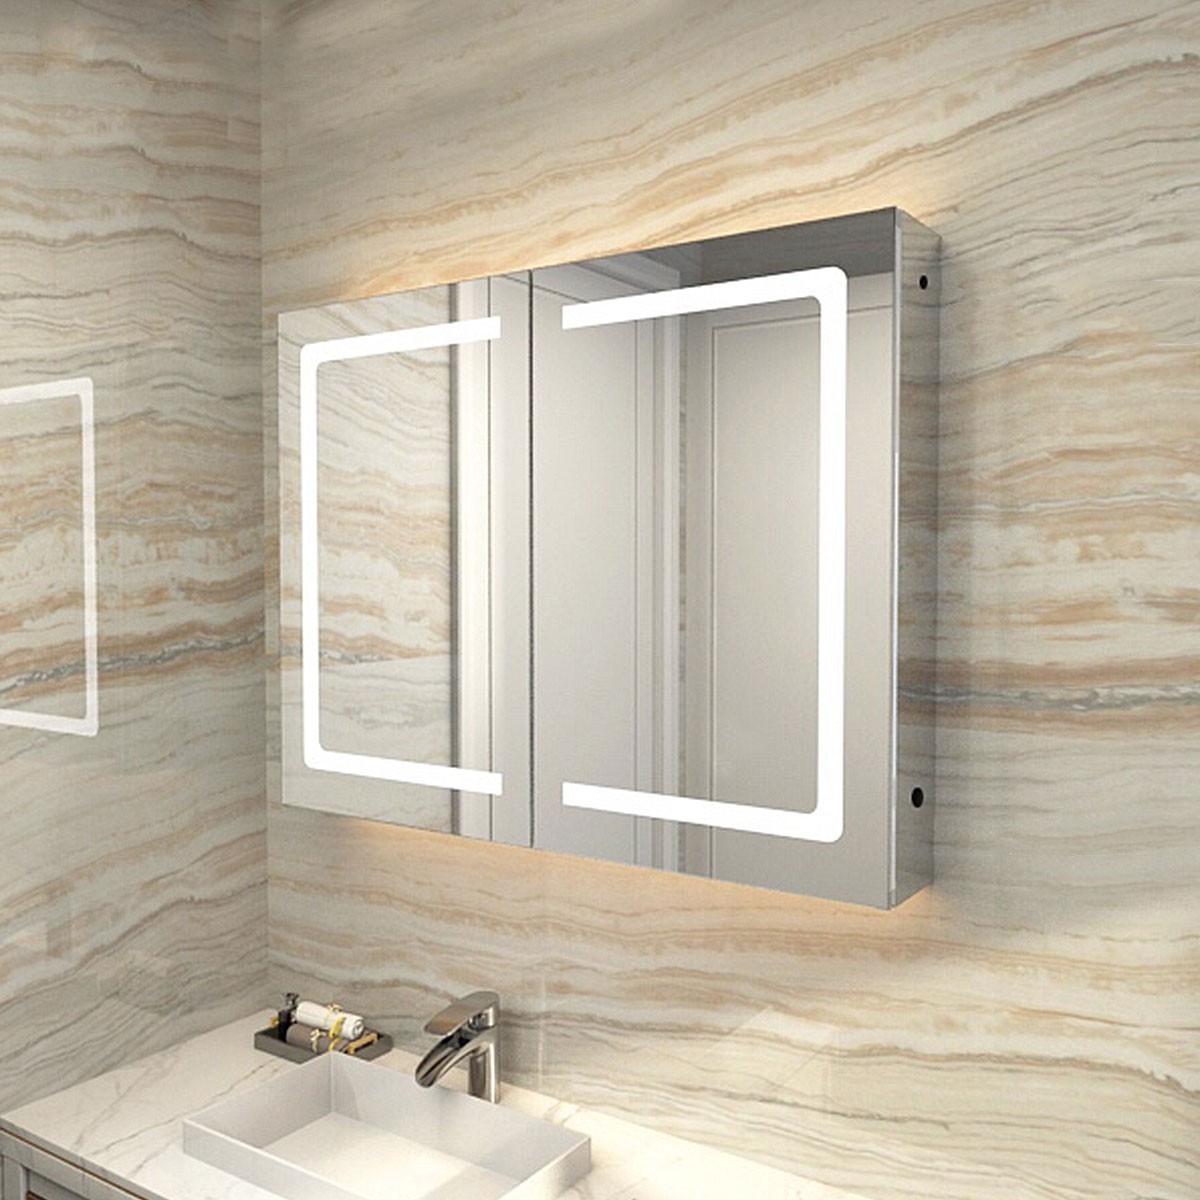 36 x 24 In LED Mirror Cabinet with Infrared Sensor (GG03-3624)